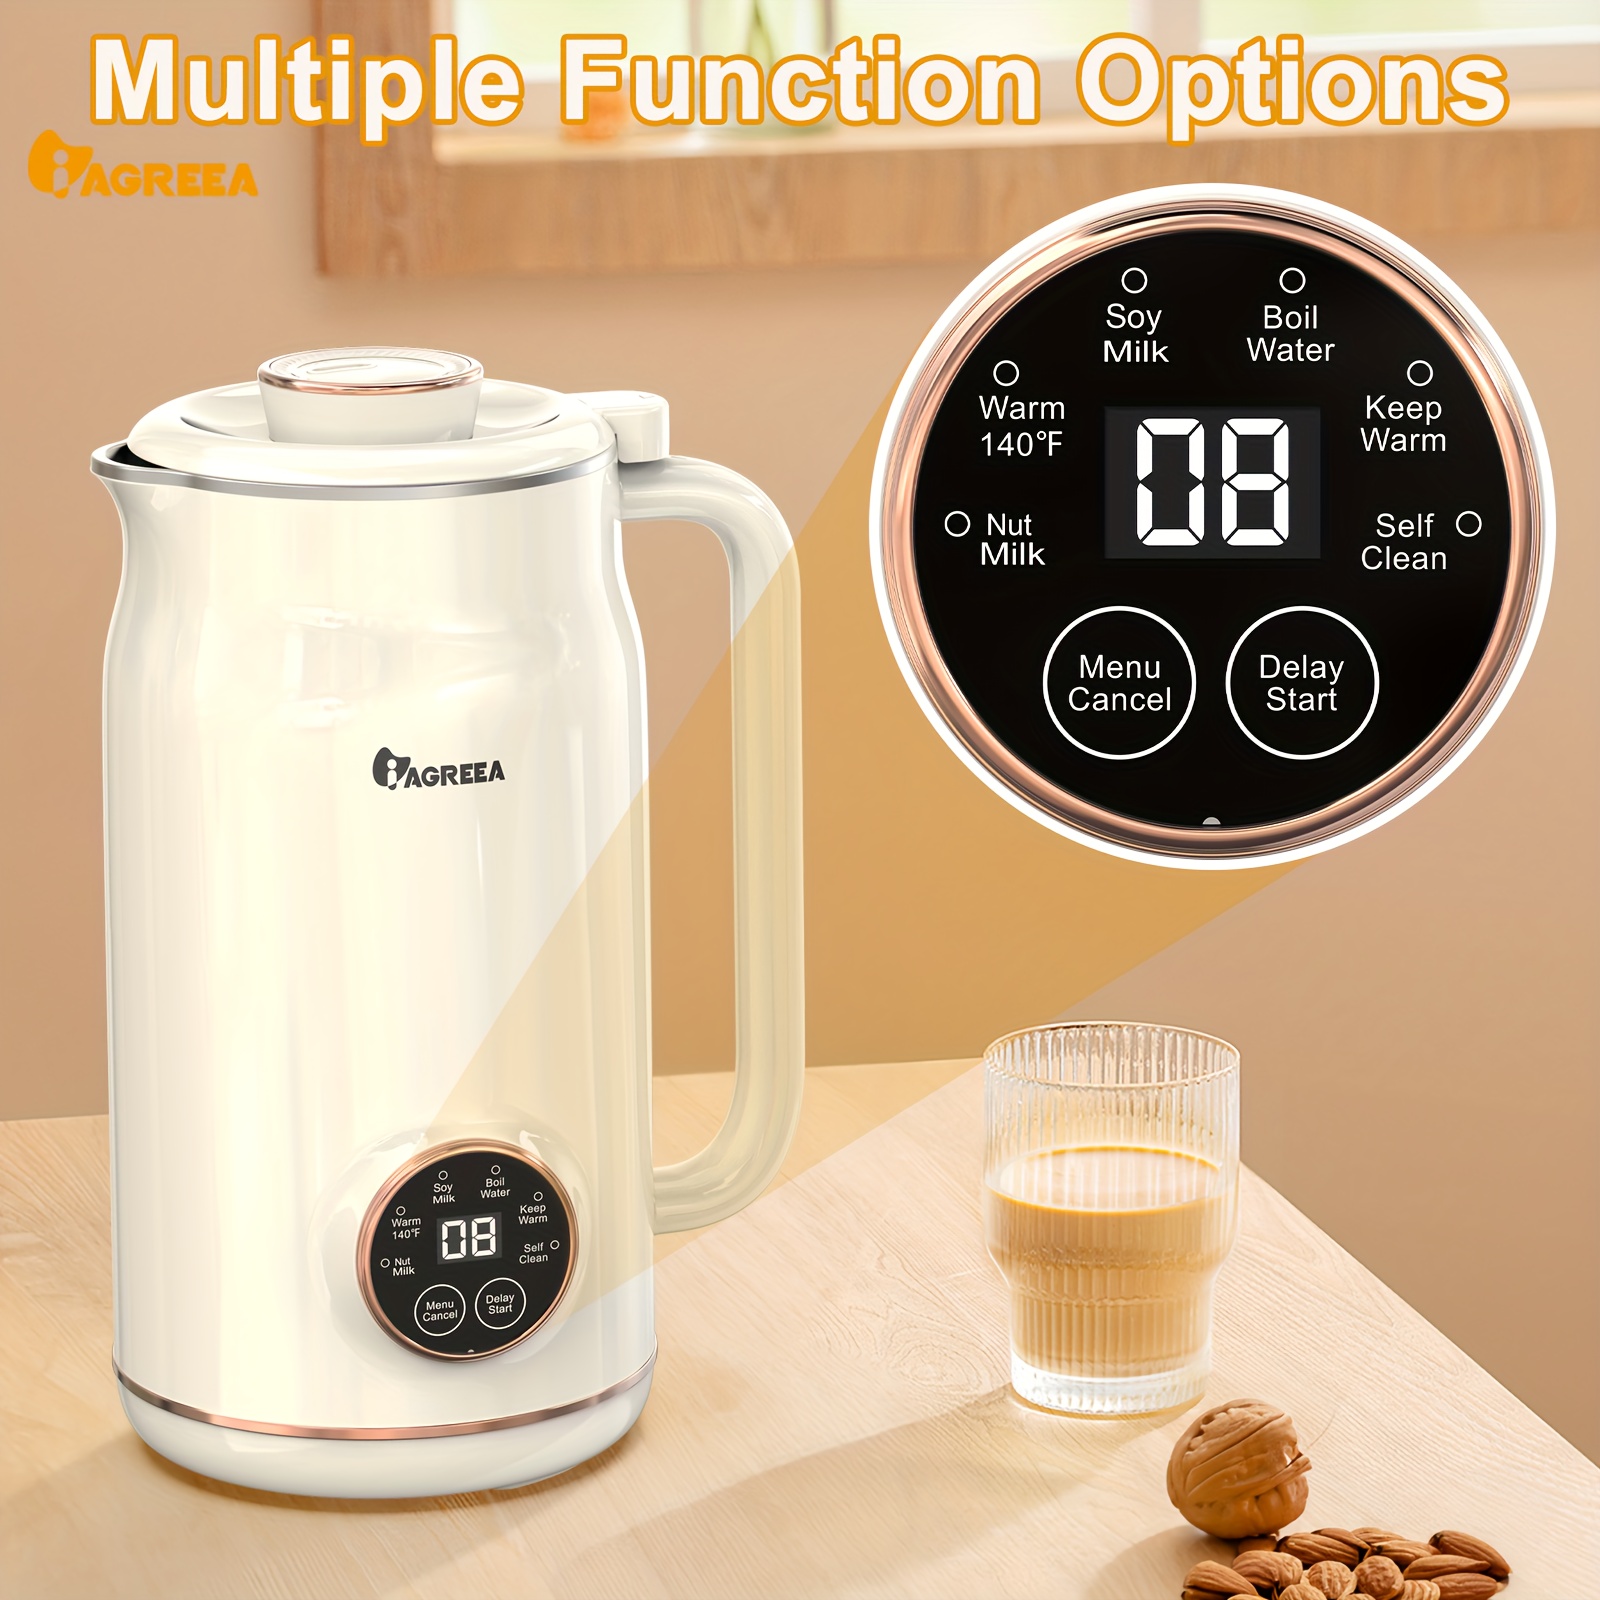 Iagreea Soybean Milk Machine, Stainless Steel, Wall Breaking Machine, Nut Milk  Machine, Portable Juicer, Boiling Free Automatic Juicer, Temperature  Control, Intelligent Touch Control Milk Heater, One Button Cleaning,  Suitable For Oats, Soybeans